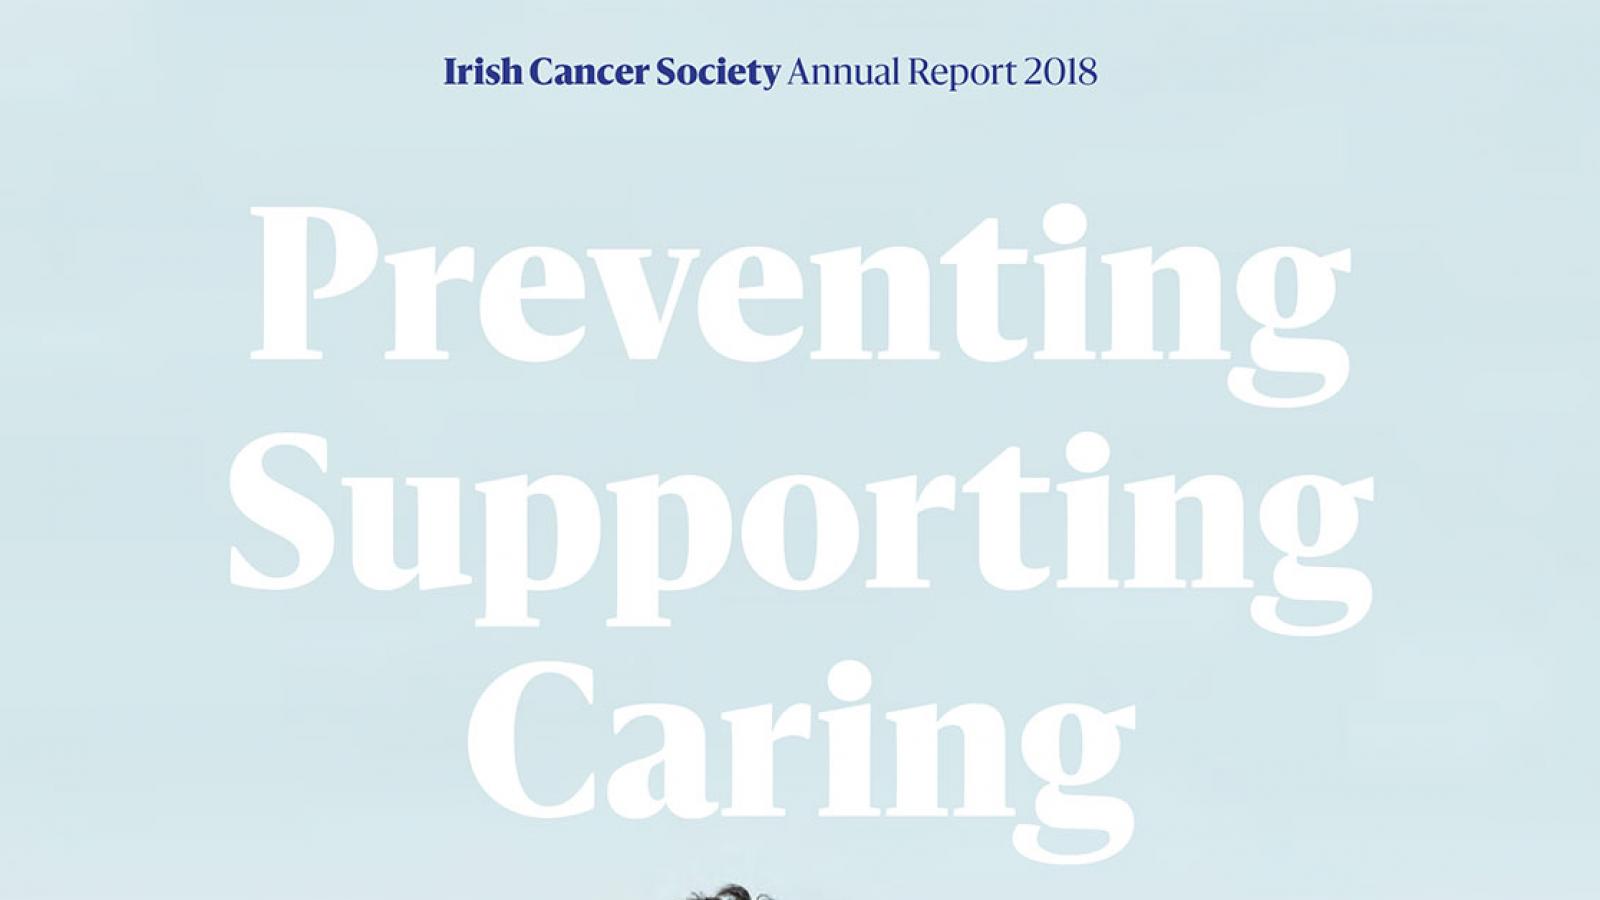 Image of the cover of the Society's 2018 annual report